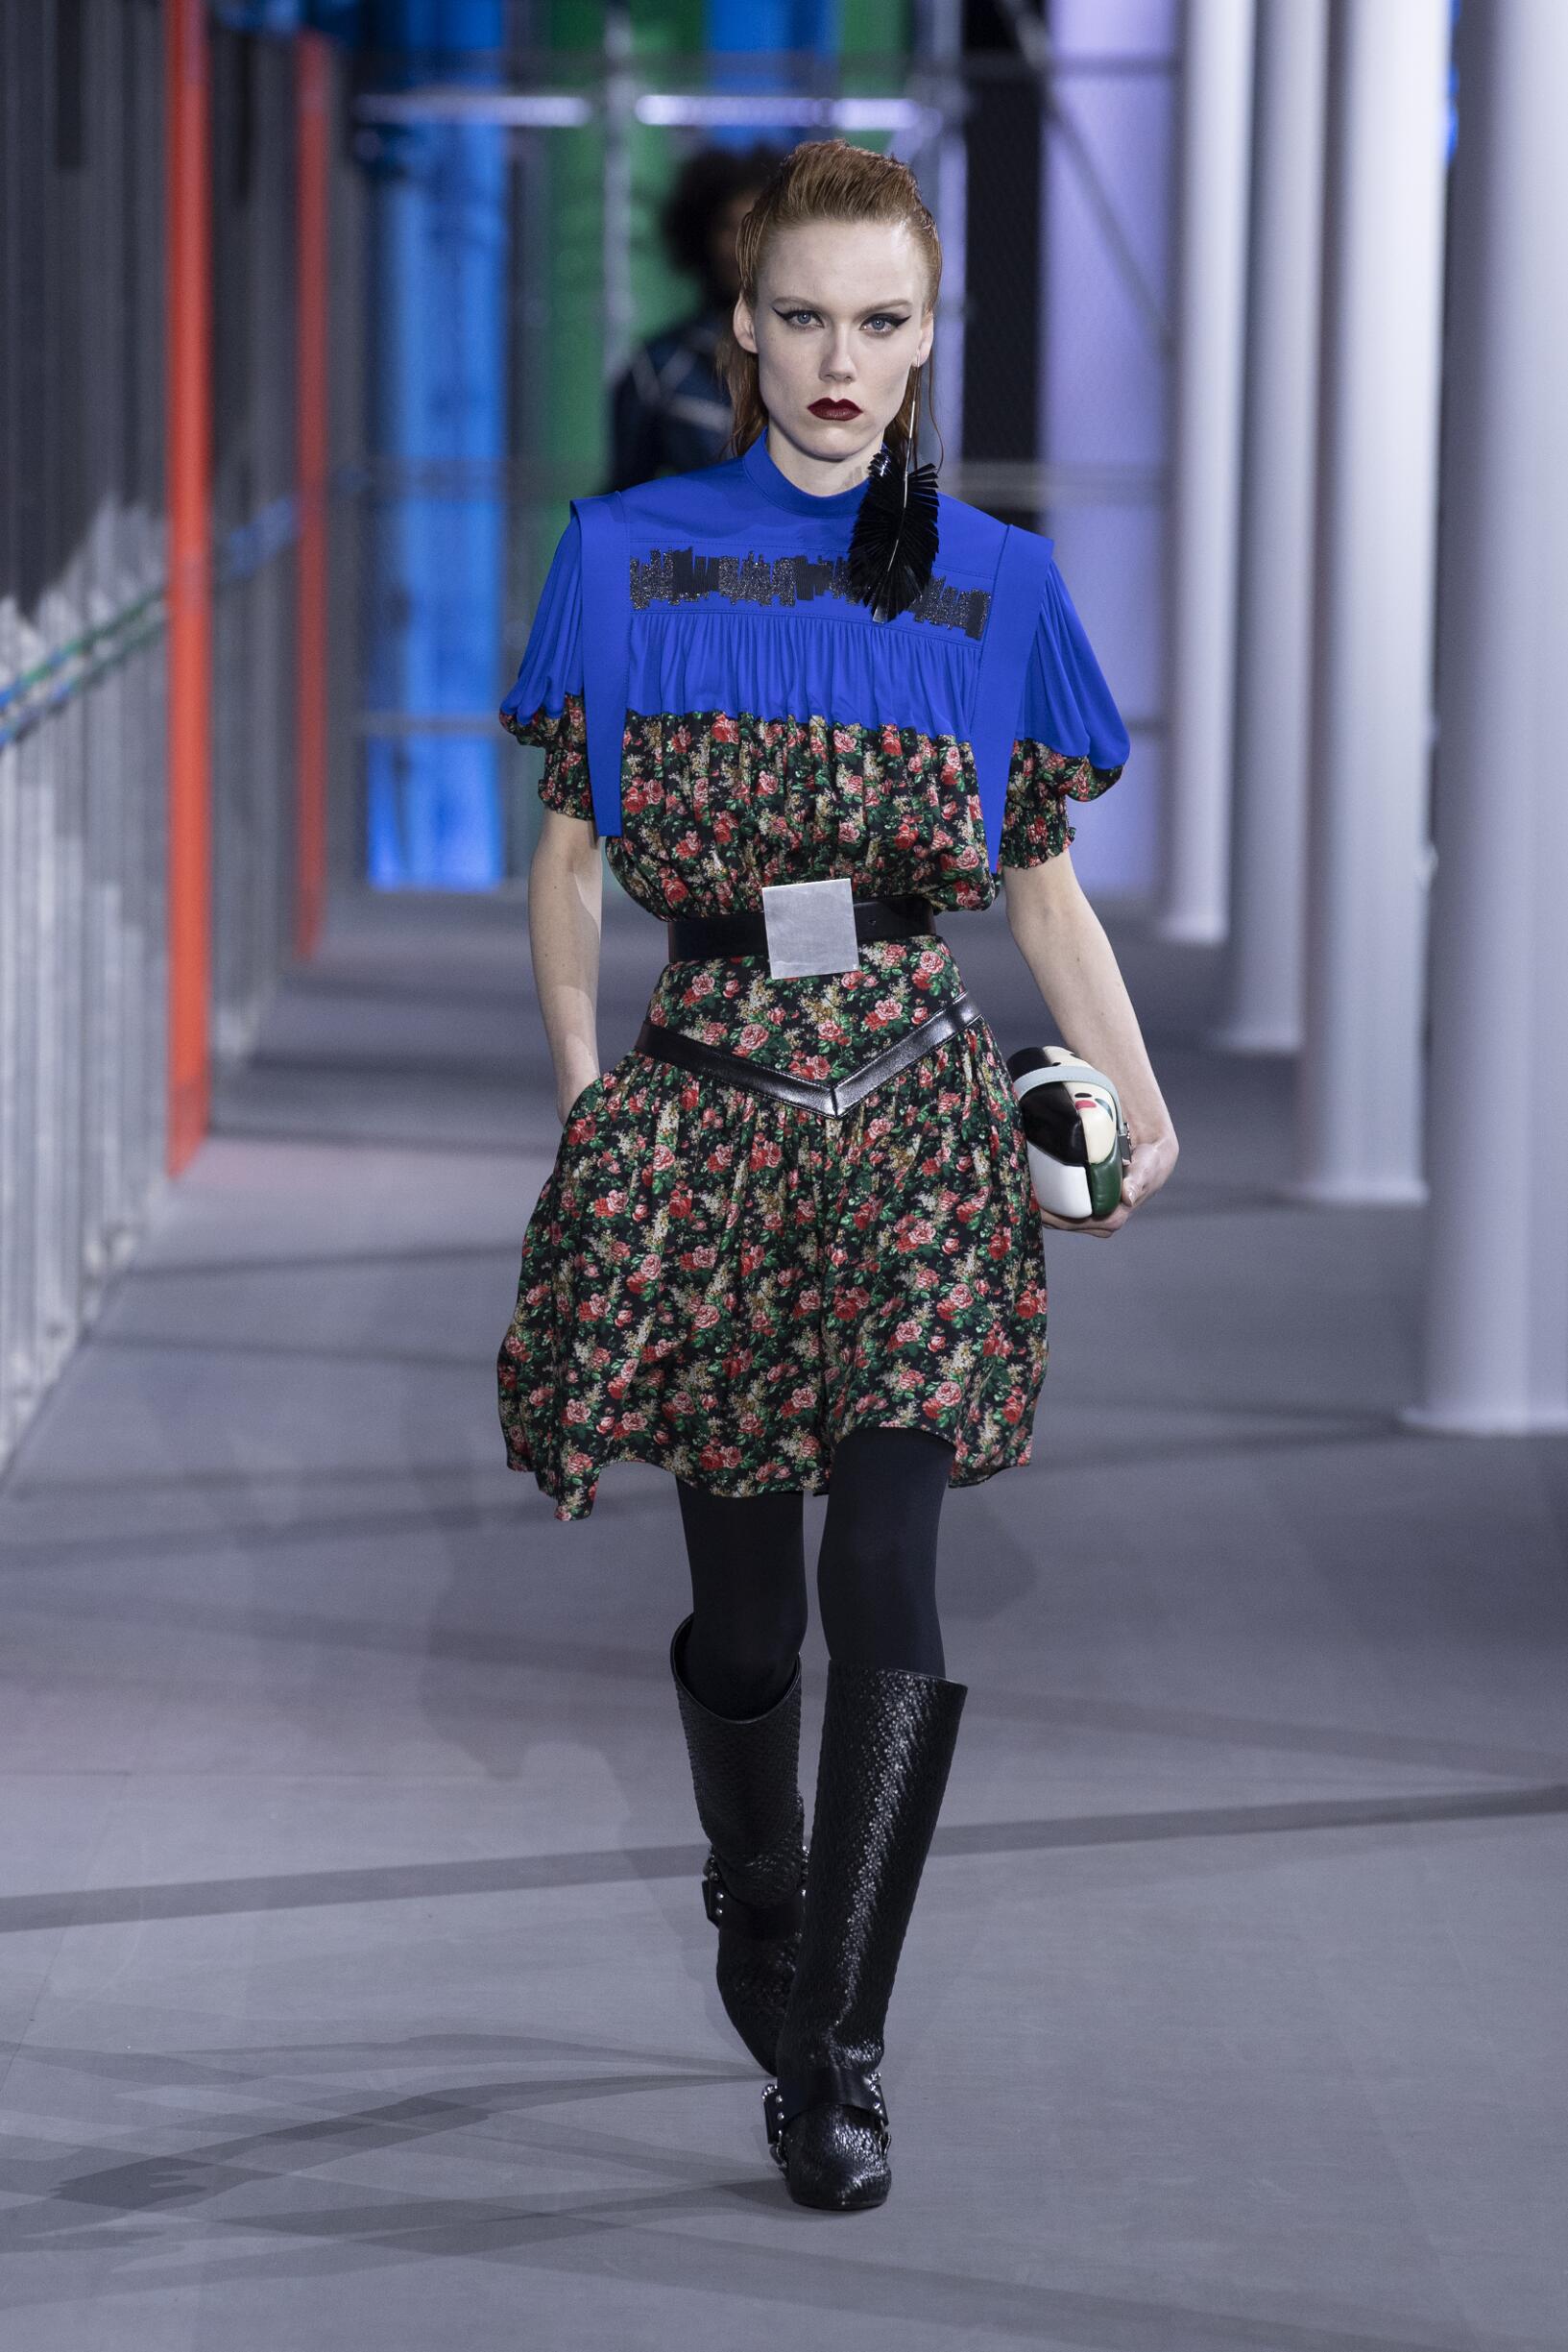 A look from the Louis Vuitton Women's Fall-Winter 2019 Fashion